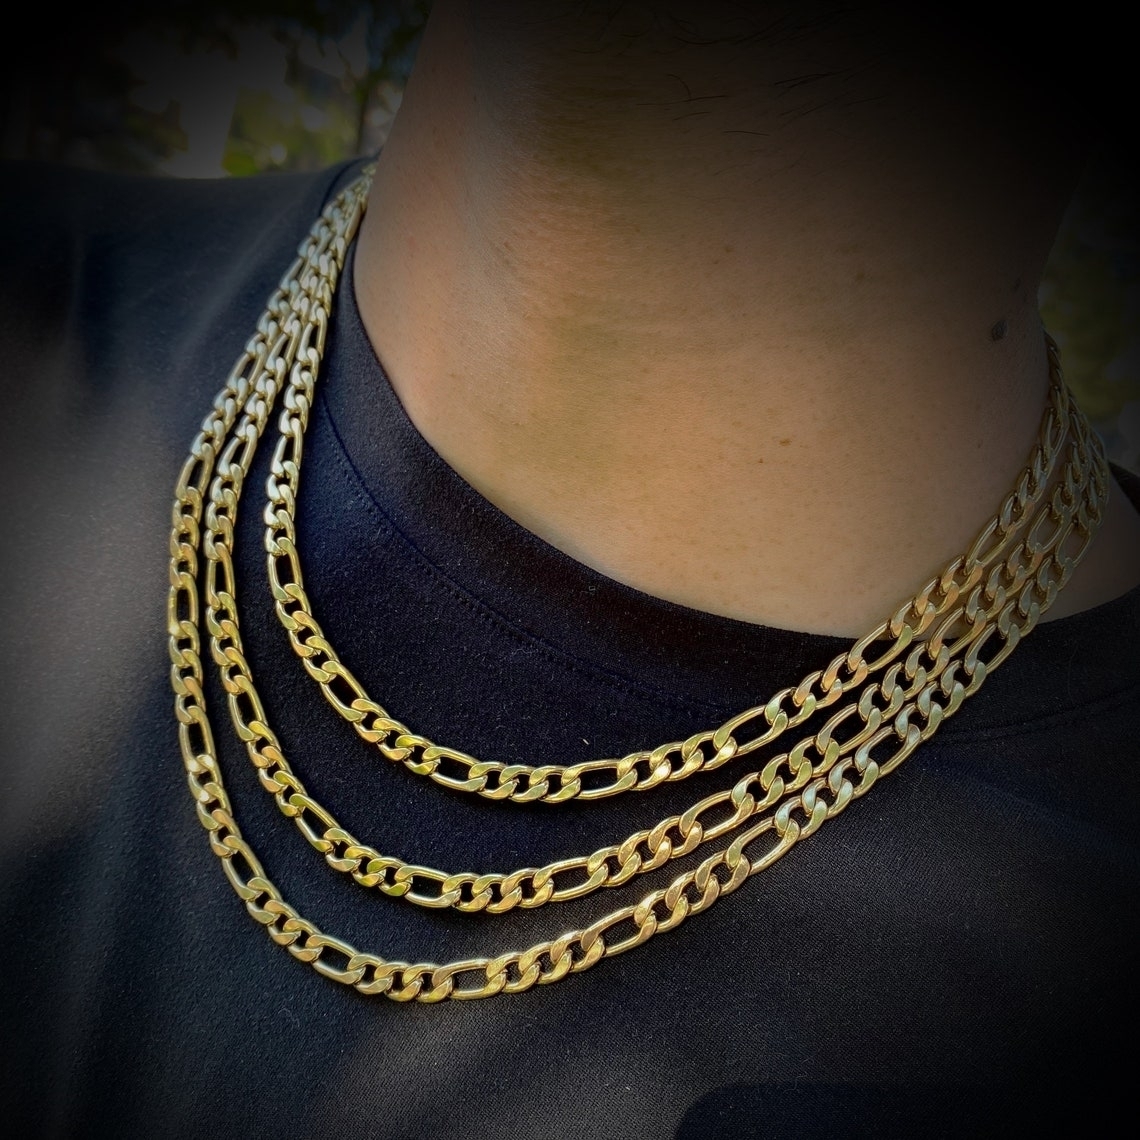 4mm Figaro Chain Necklace Yellow Gold Filled High Polish Finsh - Yellow 8'' 6mm